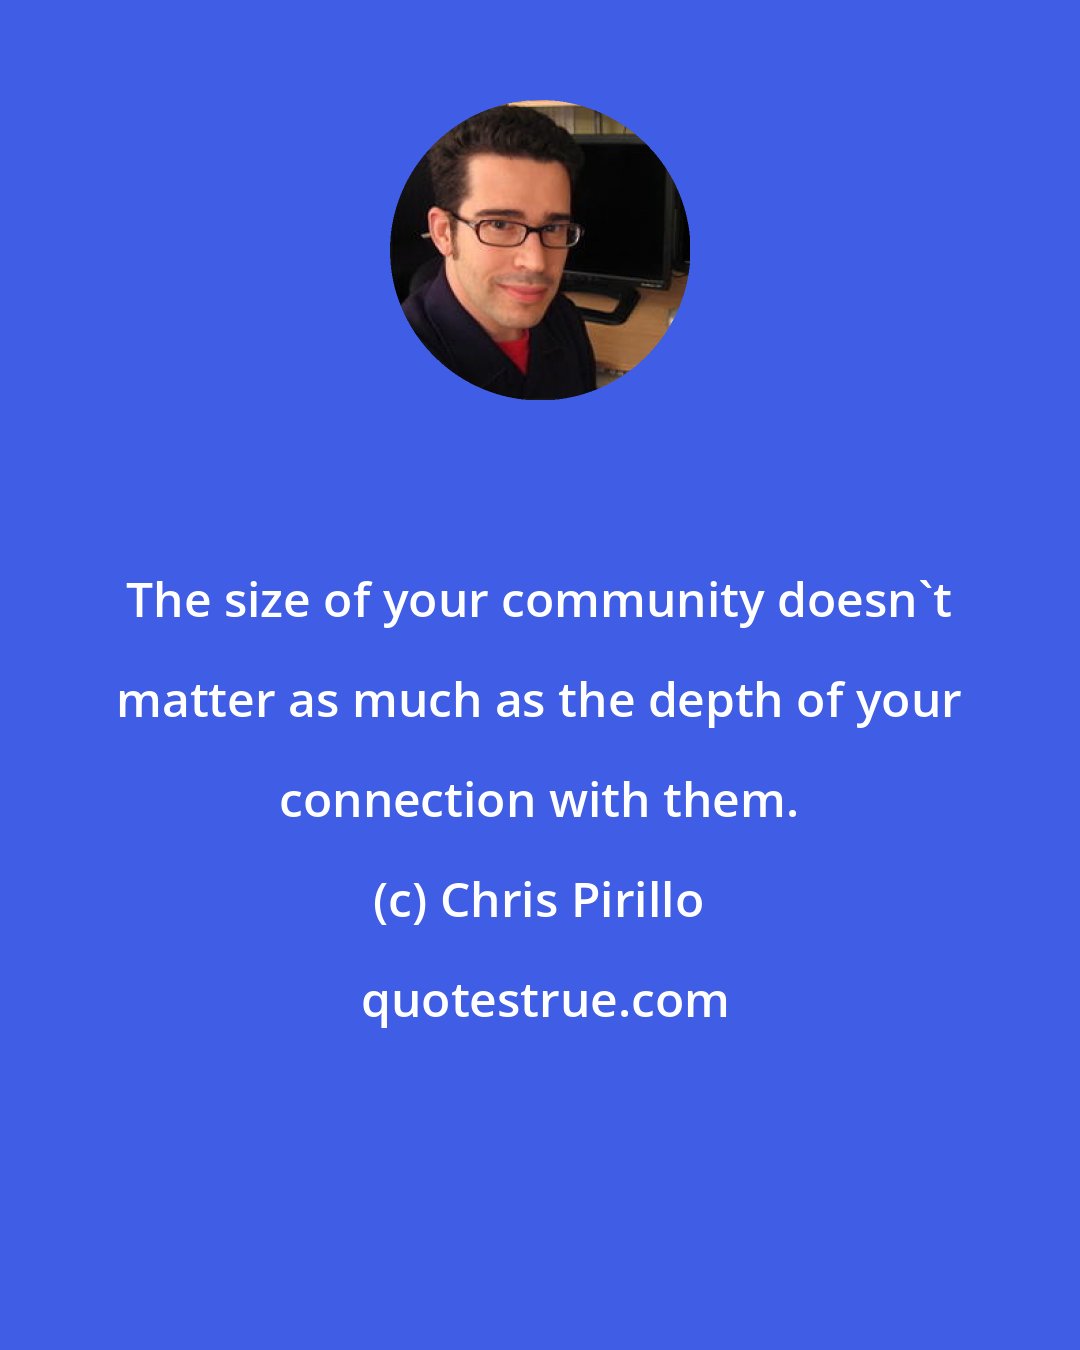 Chris Pirillo: The size of your community doesn't matter as much as the depth of your connection with them.